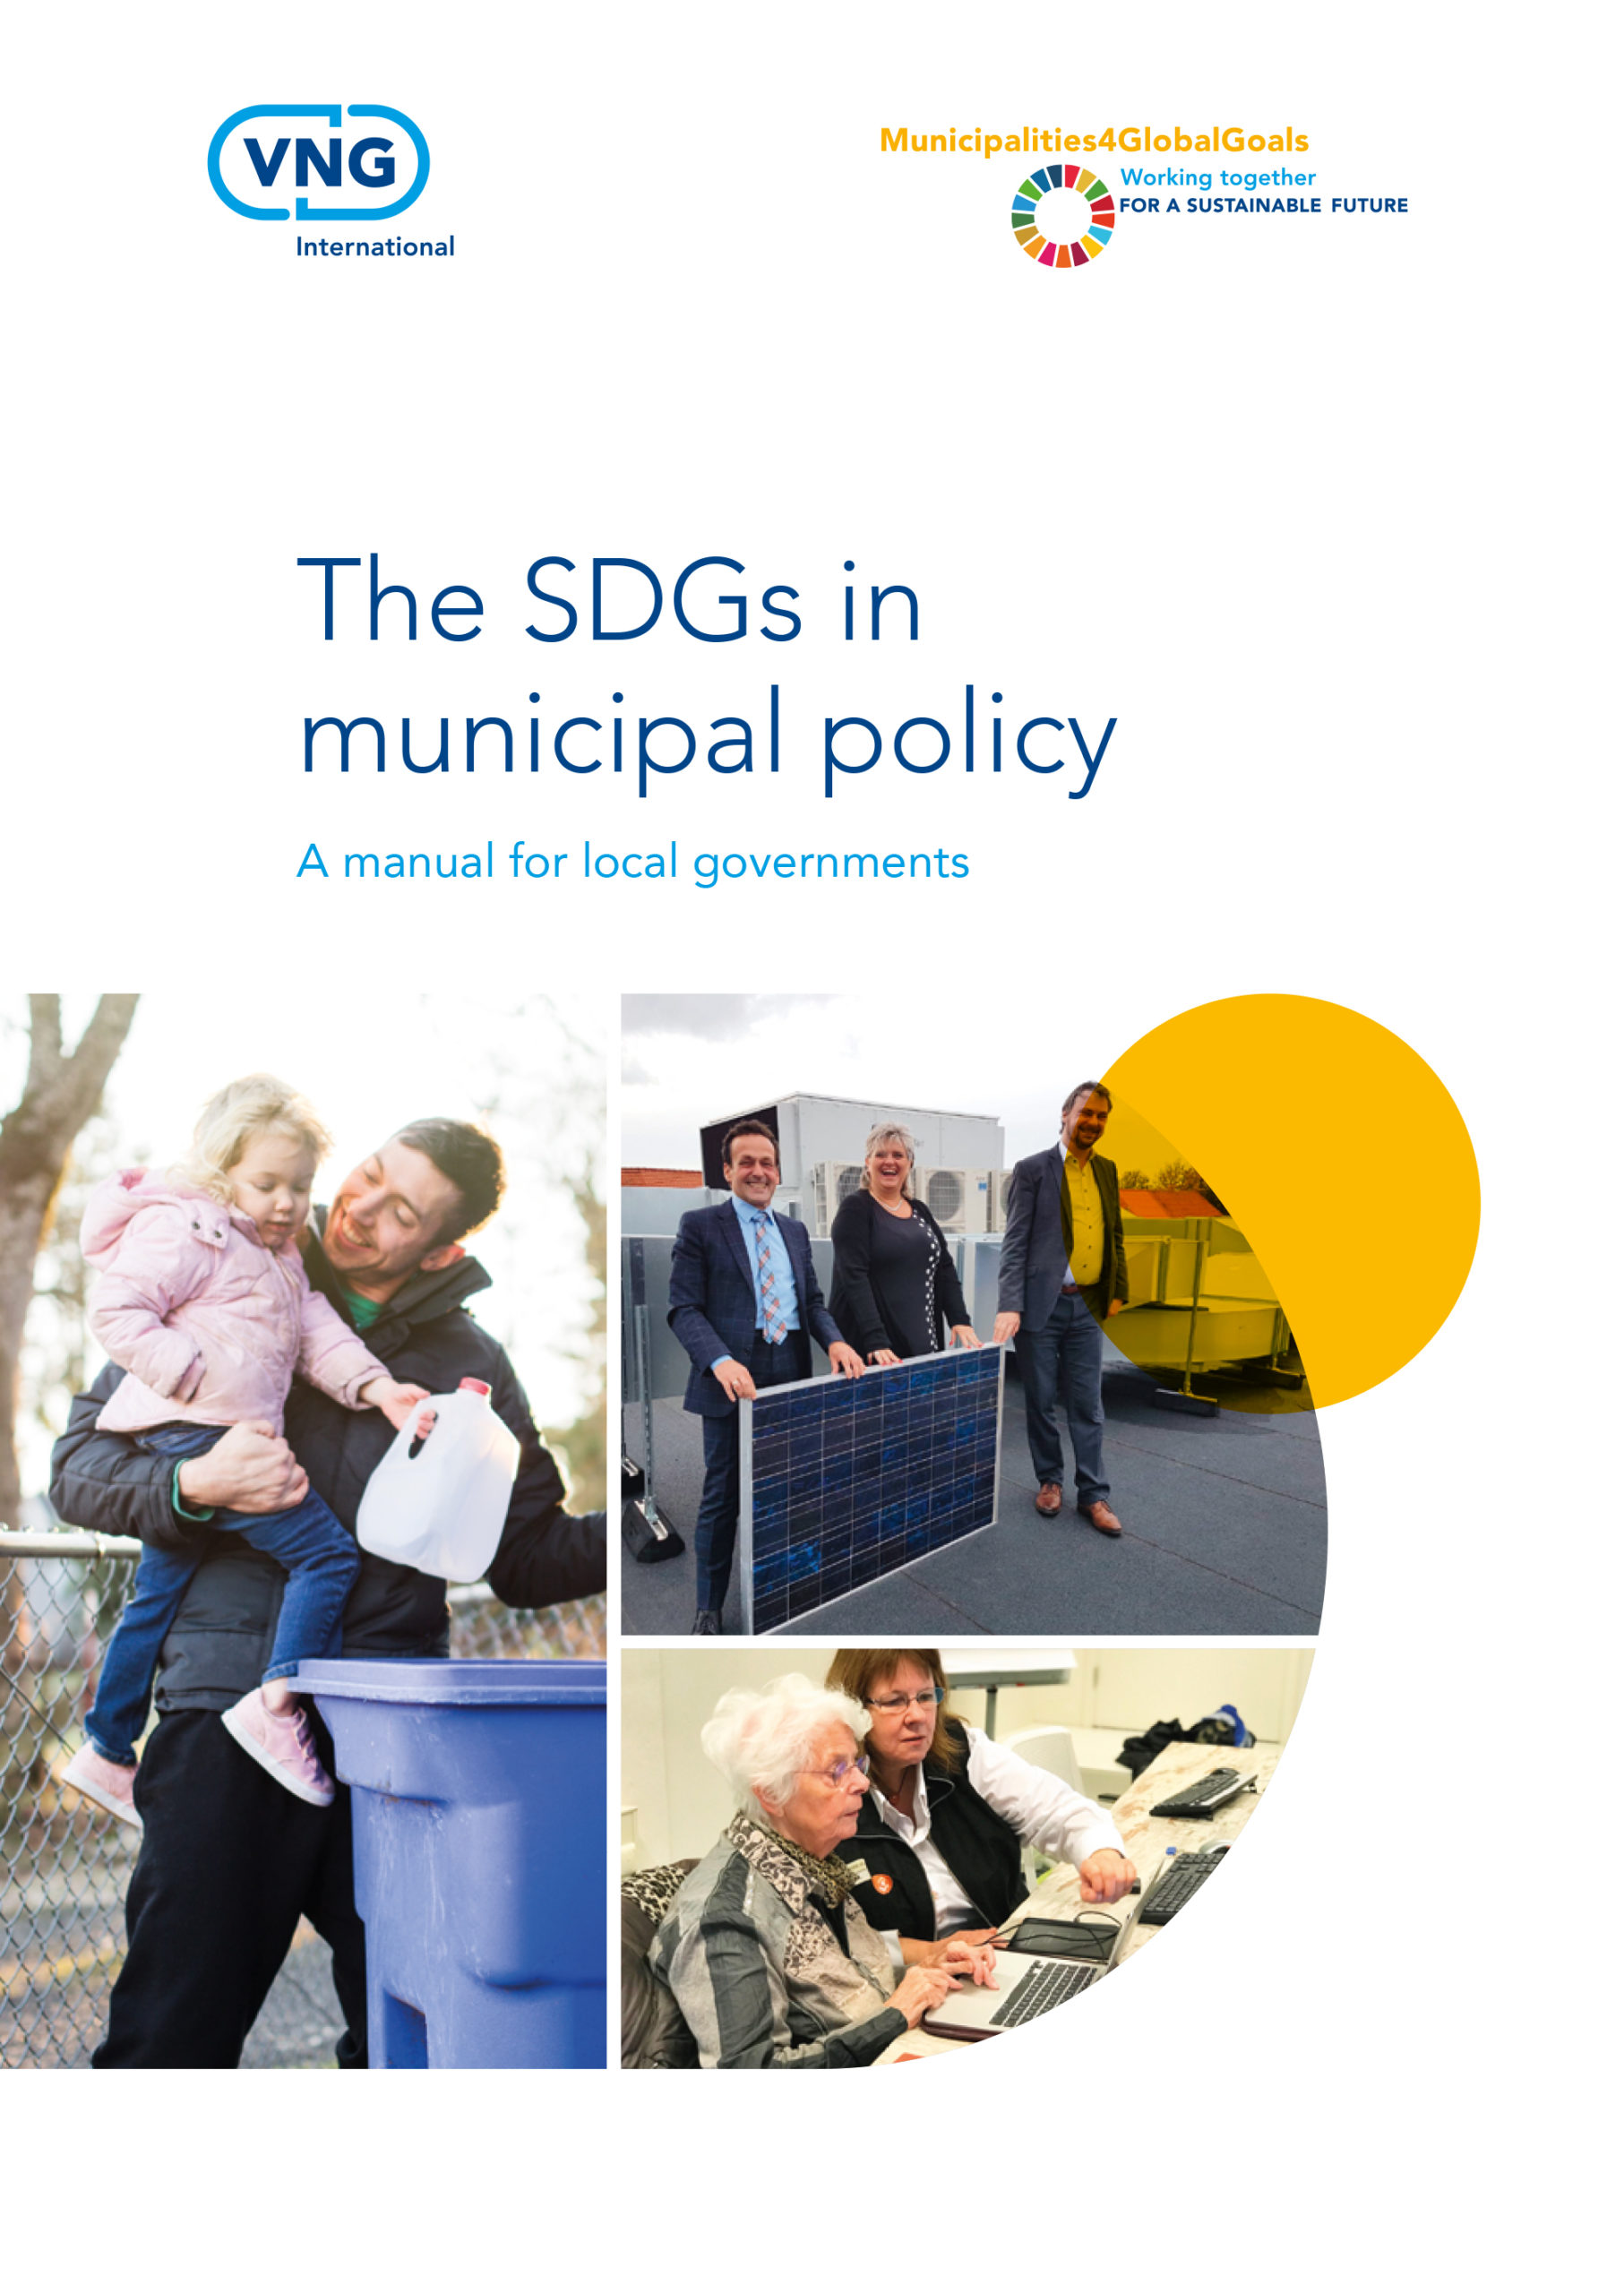 The SDGs in municipal policy | A manual for local governments